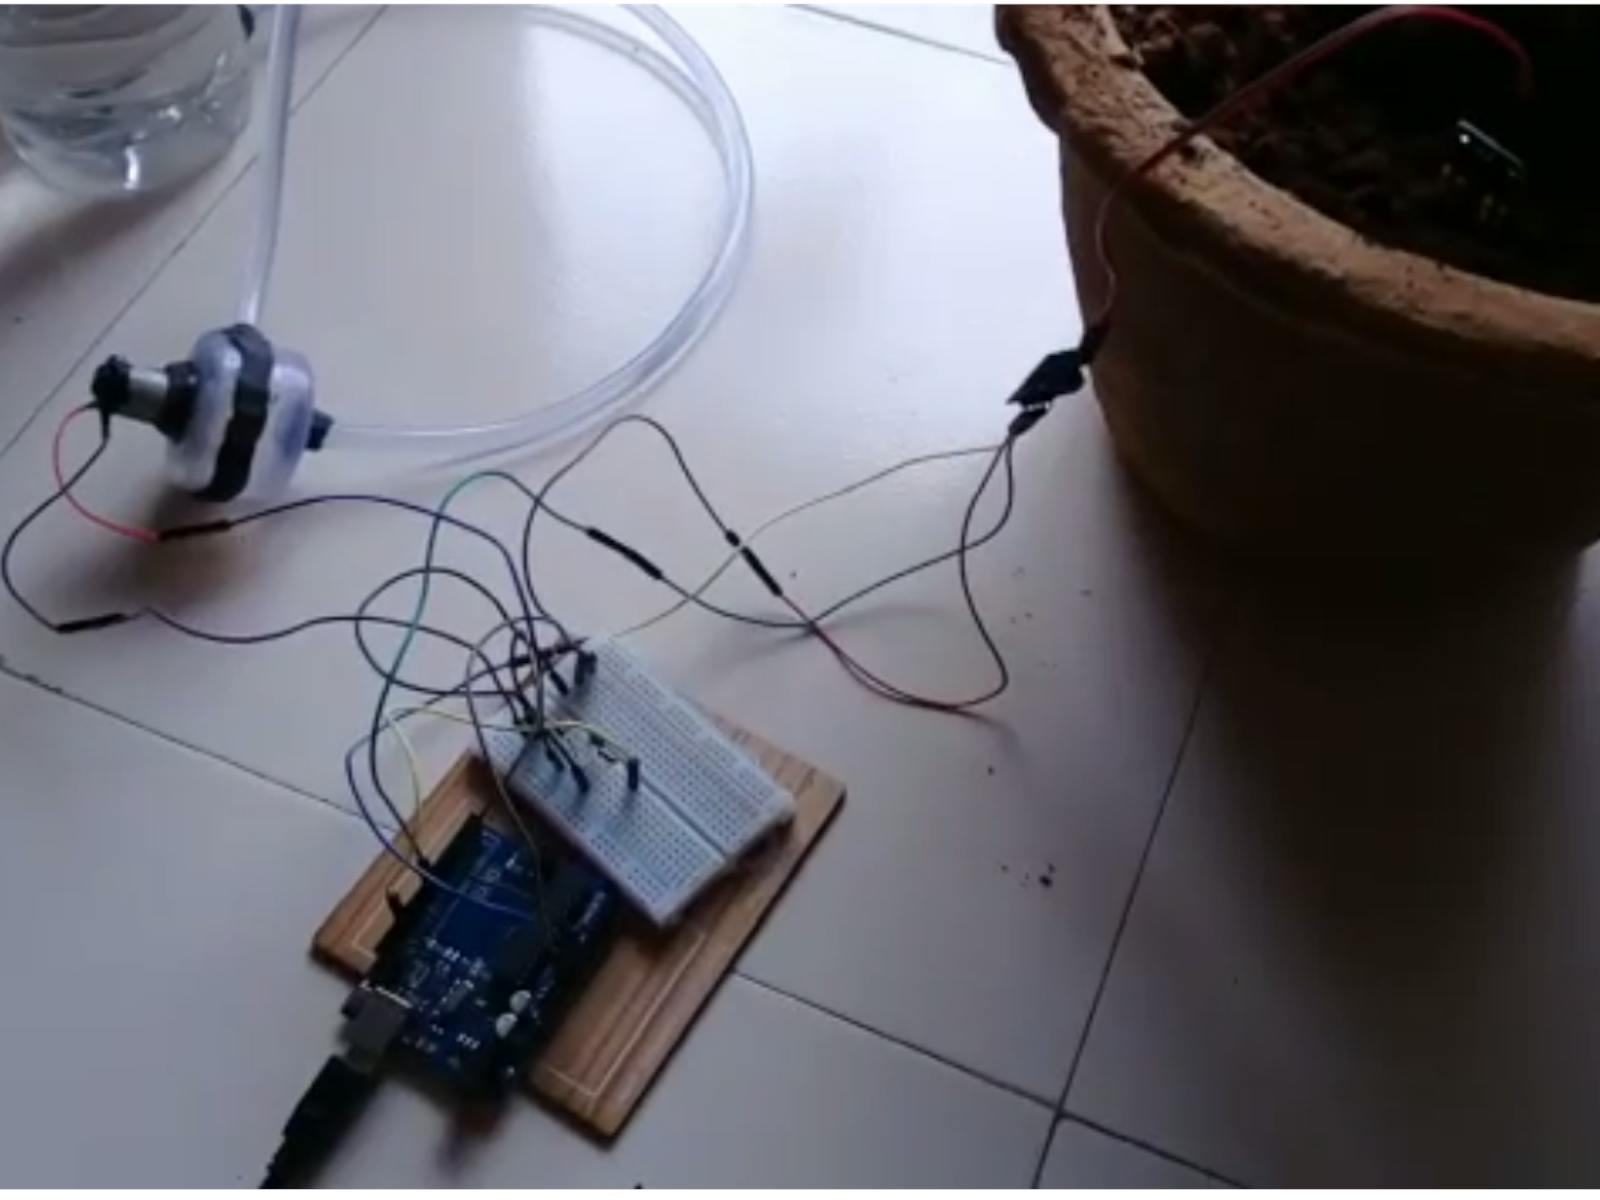 Automatic Plant Watering System Using Uno - Hackster.io